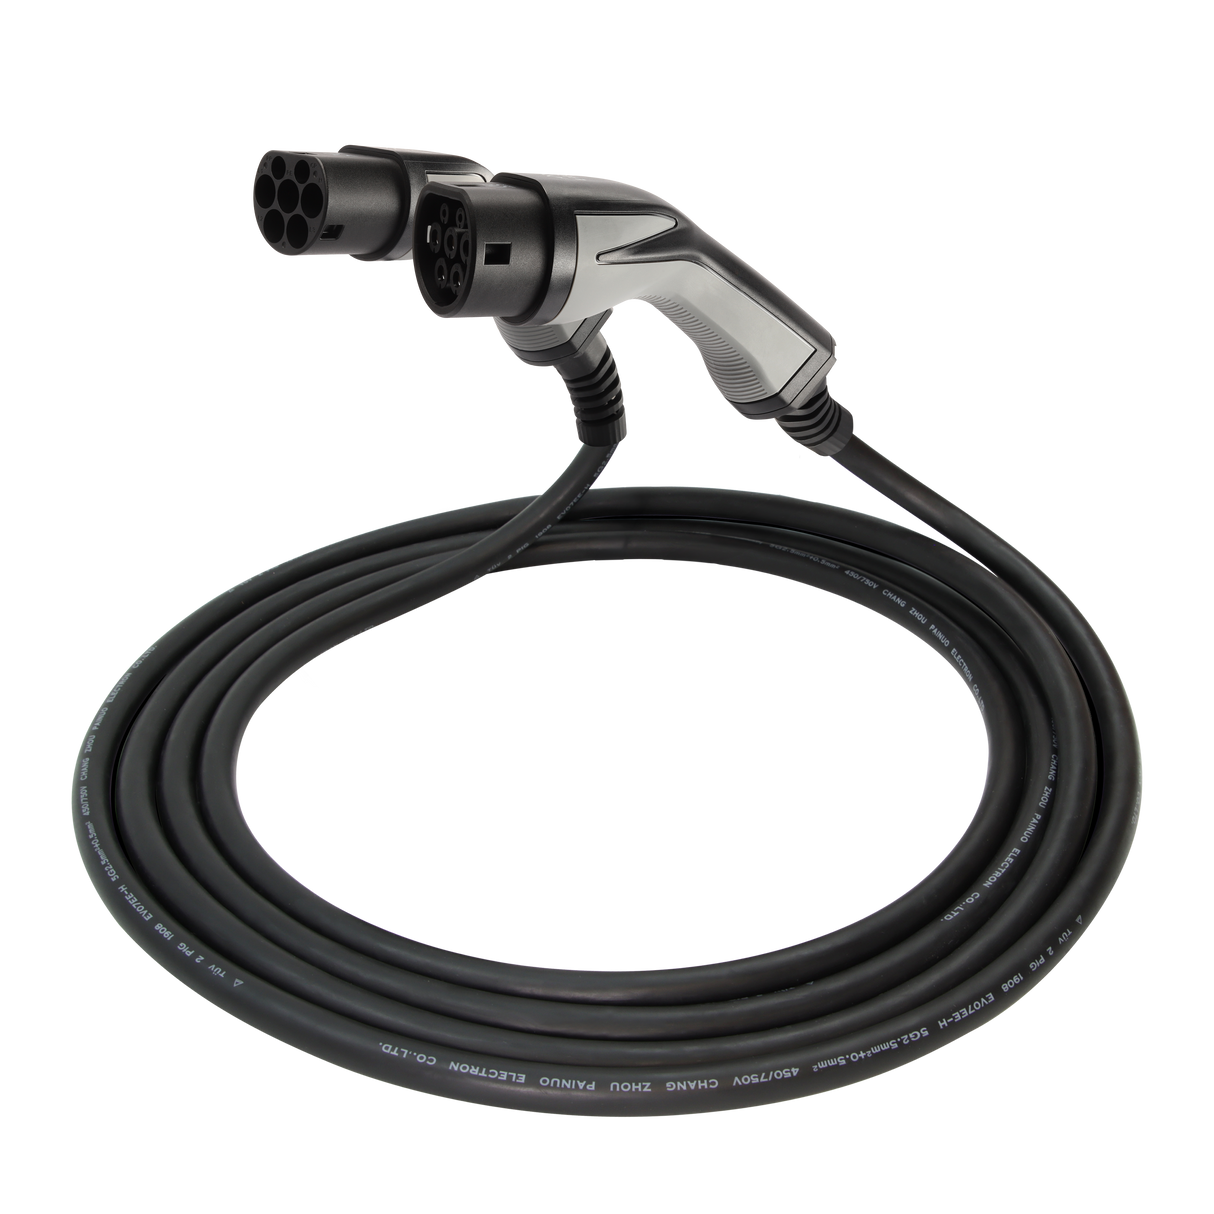 Charging cable Land Rover Range Rover Evoque - Erock Pro Type 2 - 32A 1 phase (7.4 kW)